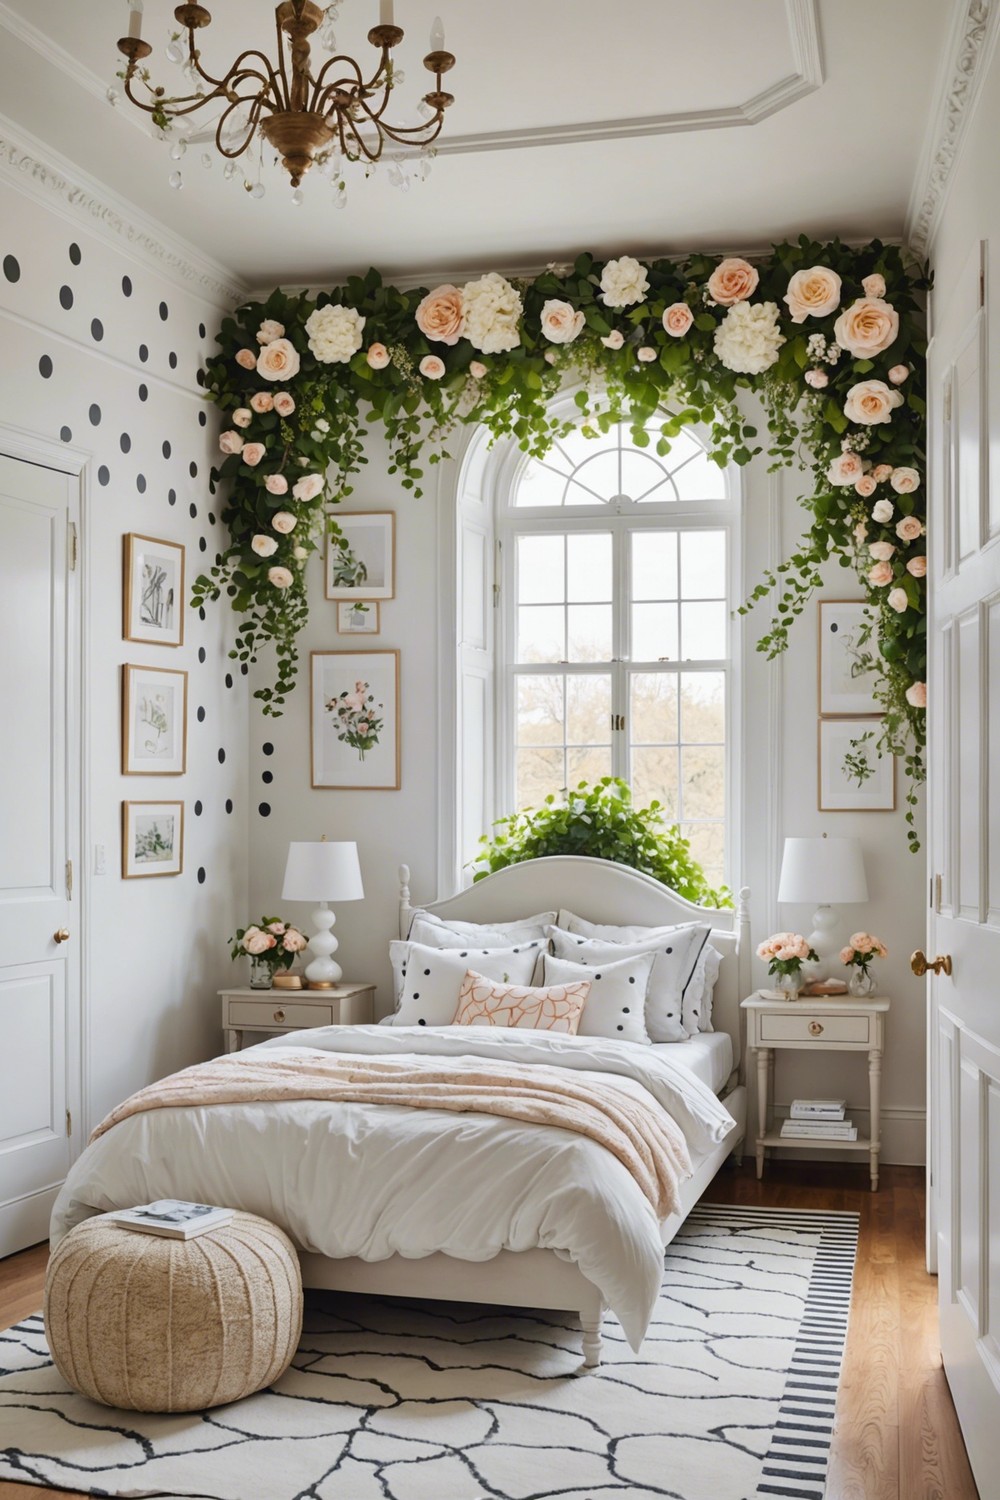 Whimsical Wonderland: White Bedroom with Whimsical Patterns